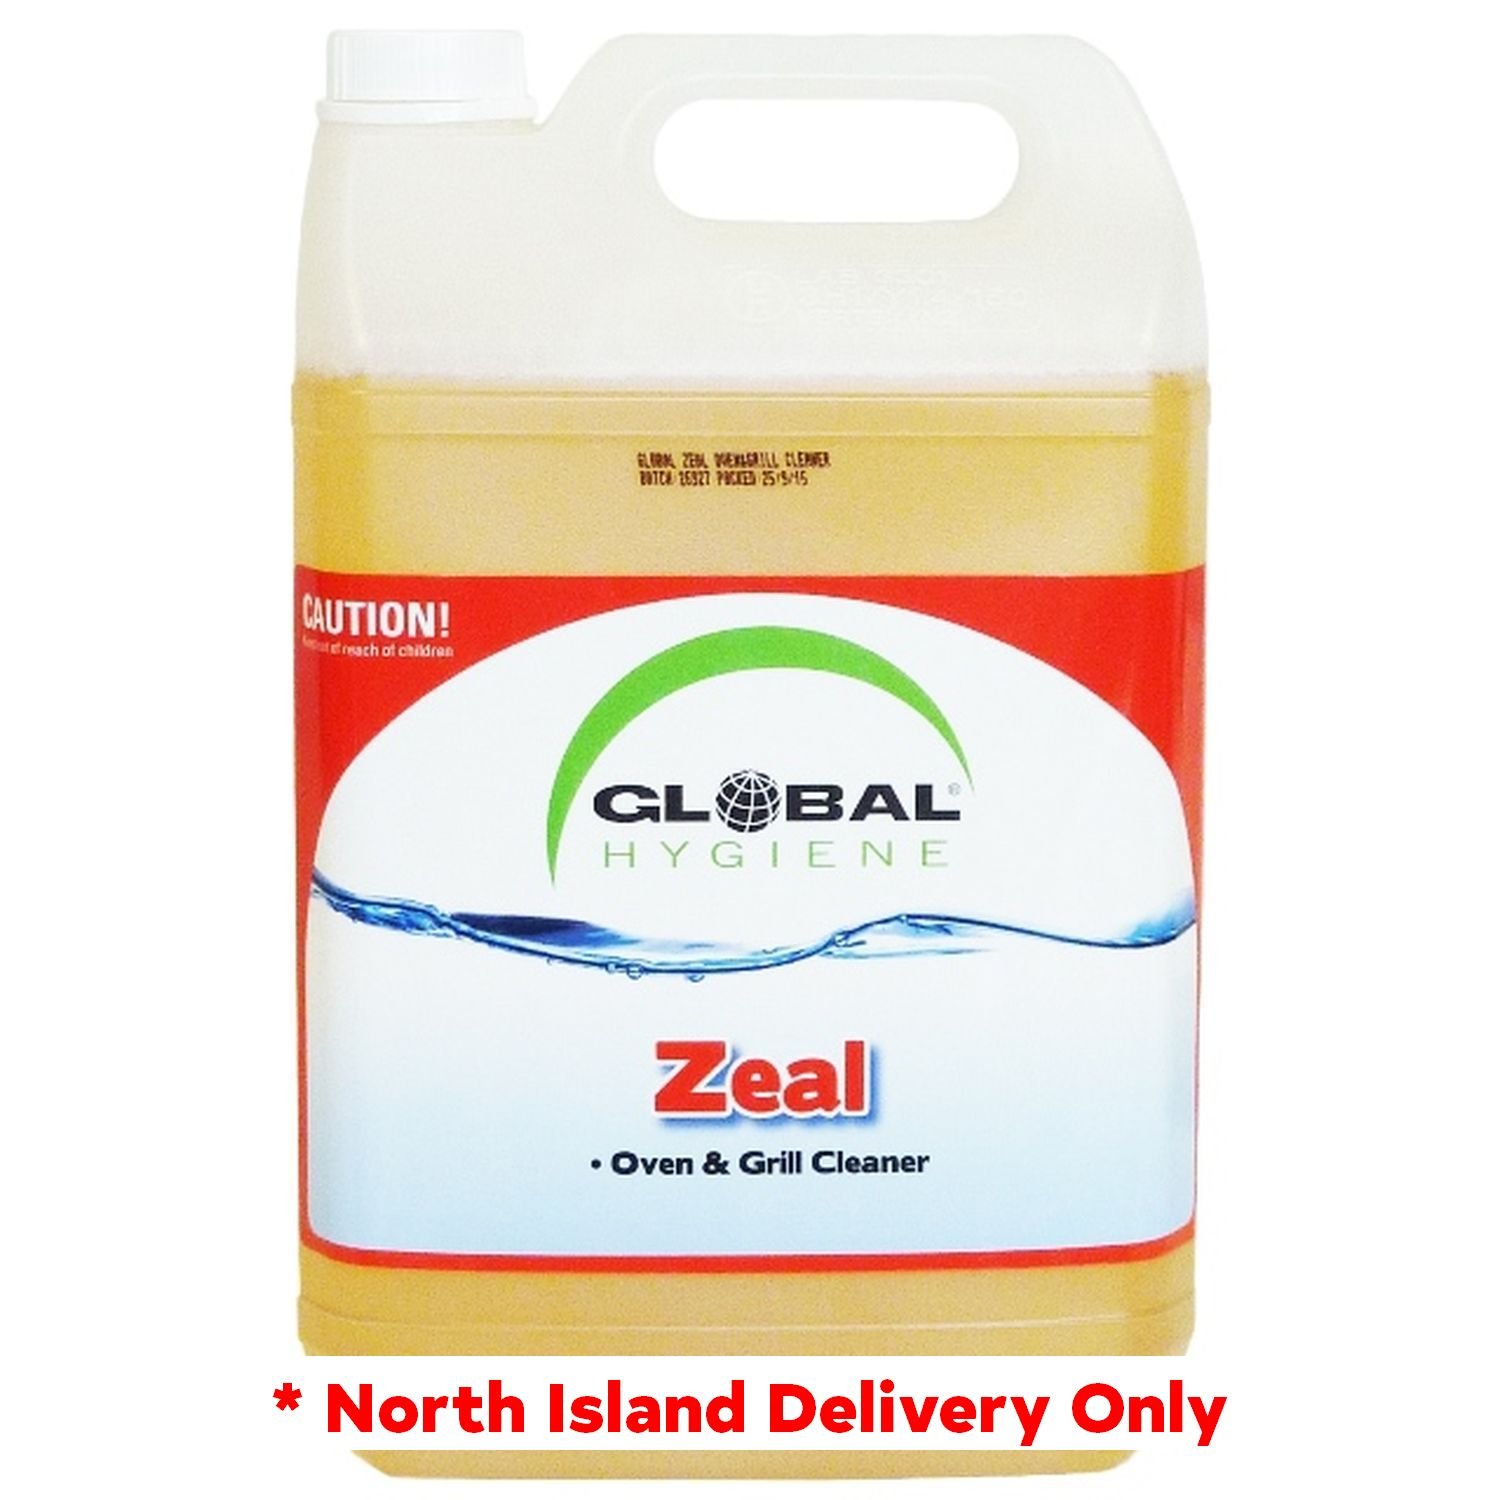 Global Zeal Oven & Grill Cleaner 5L